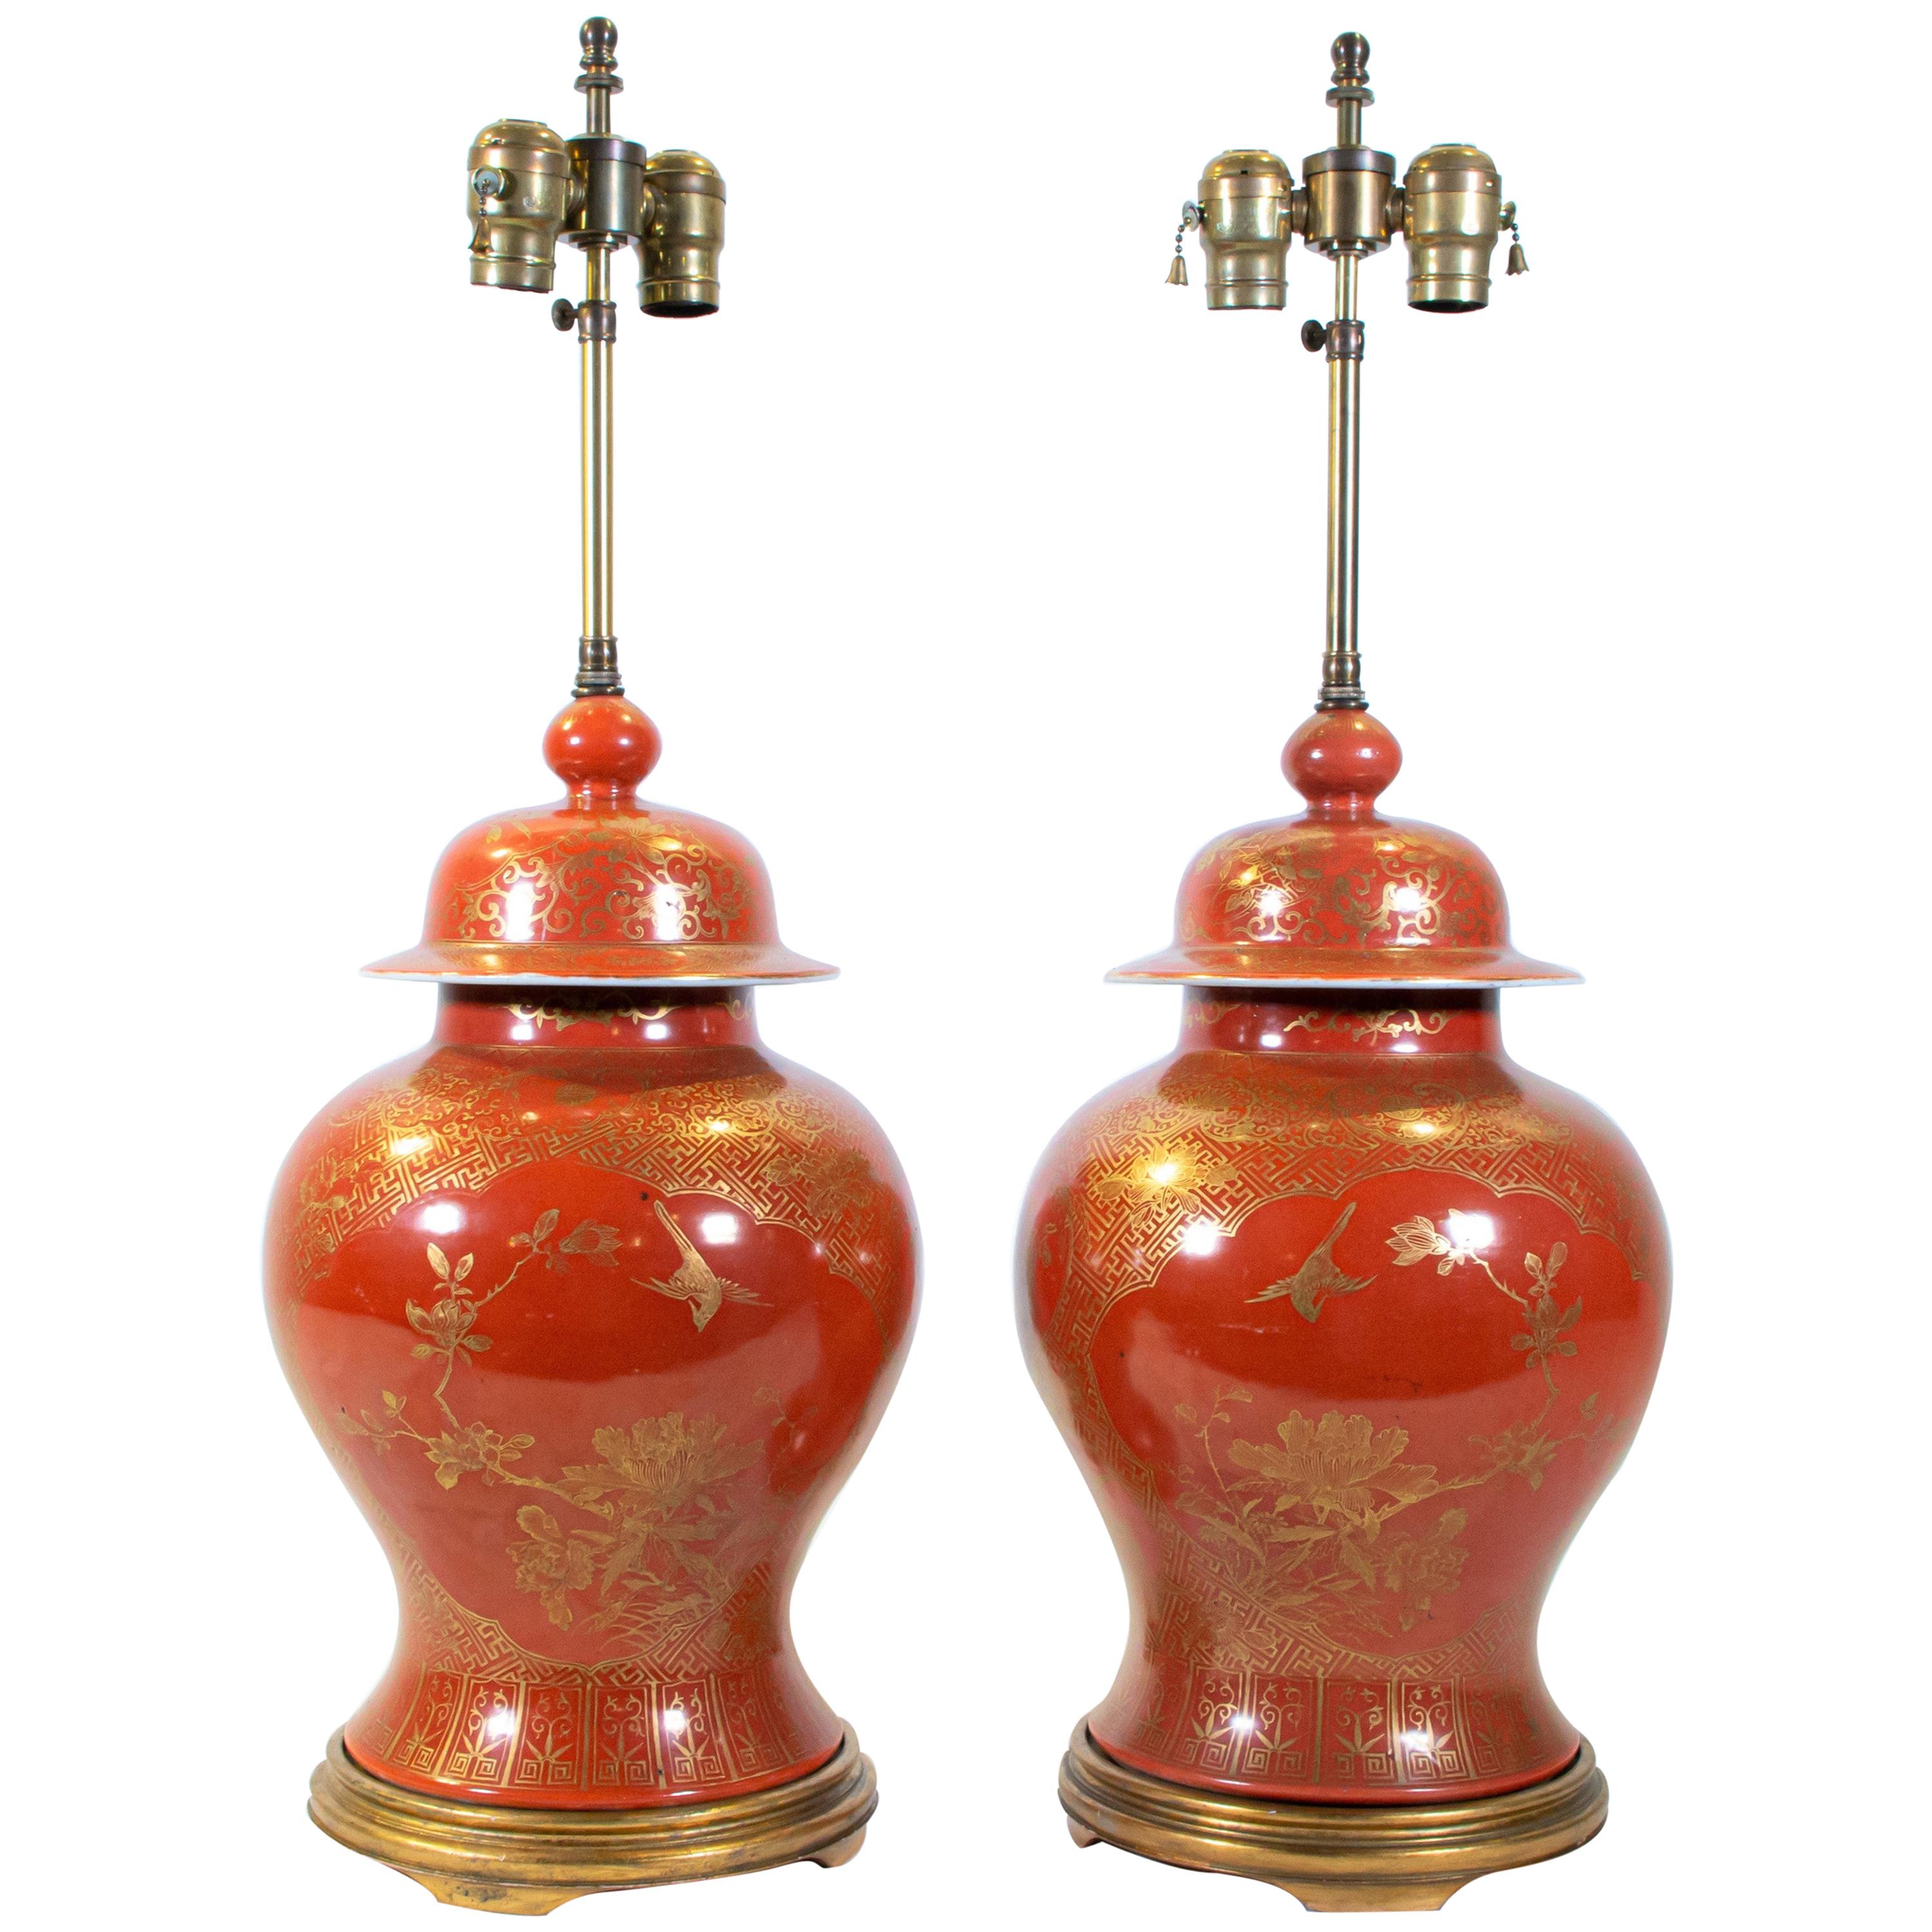 Fine pair Antique Chinese Export Orange Ground & 24K Gilt Vases Turned to Lamps